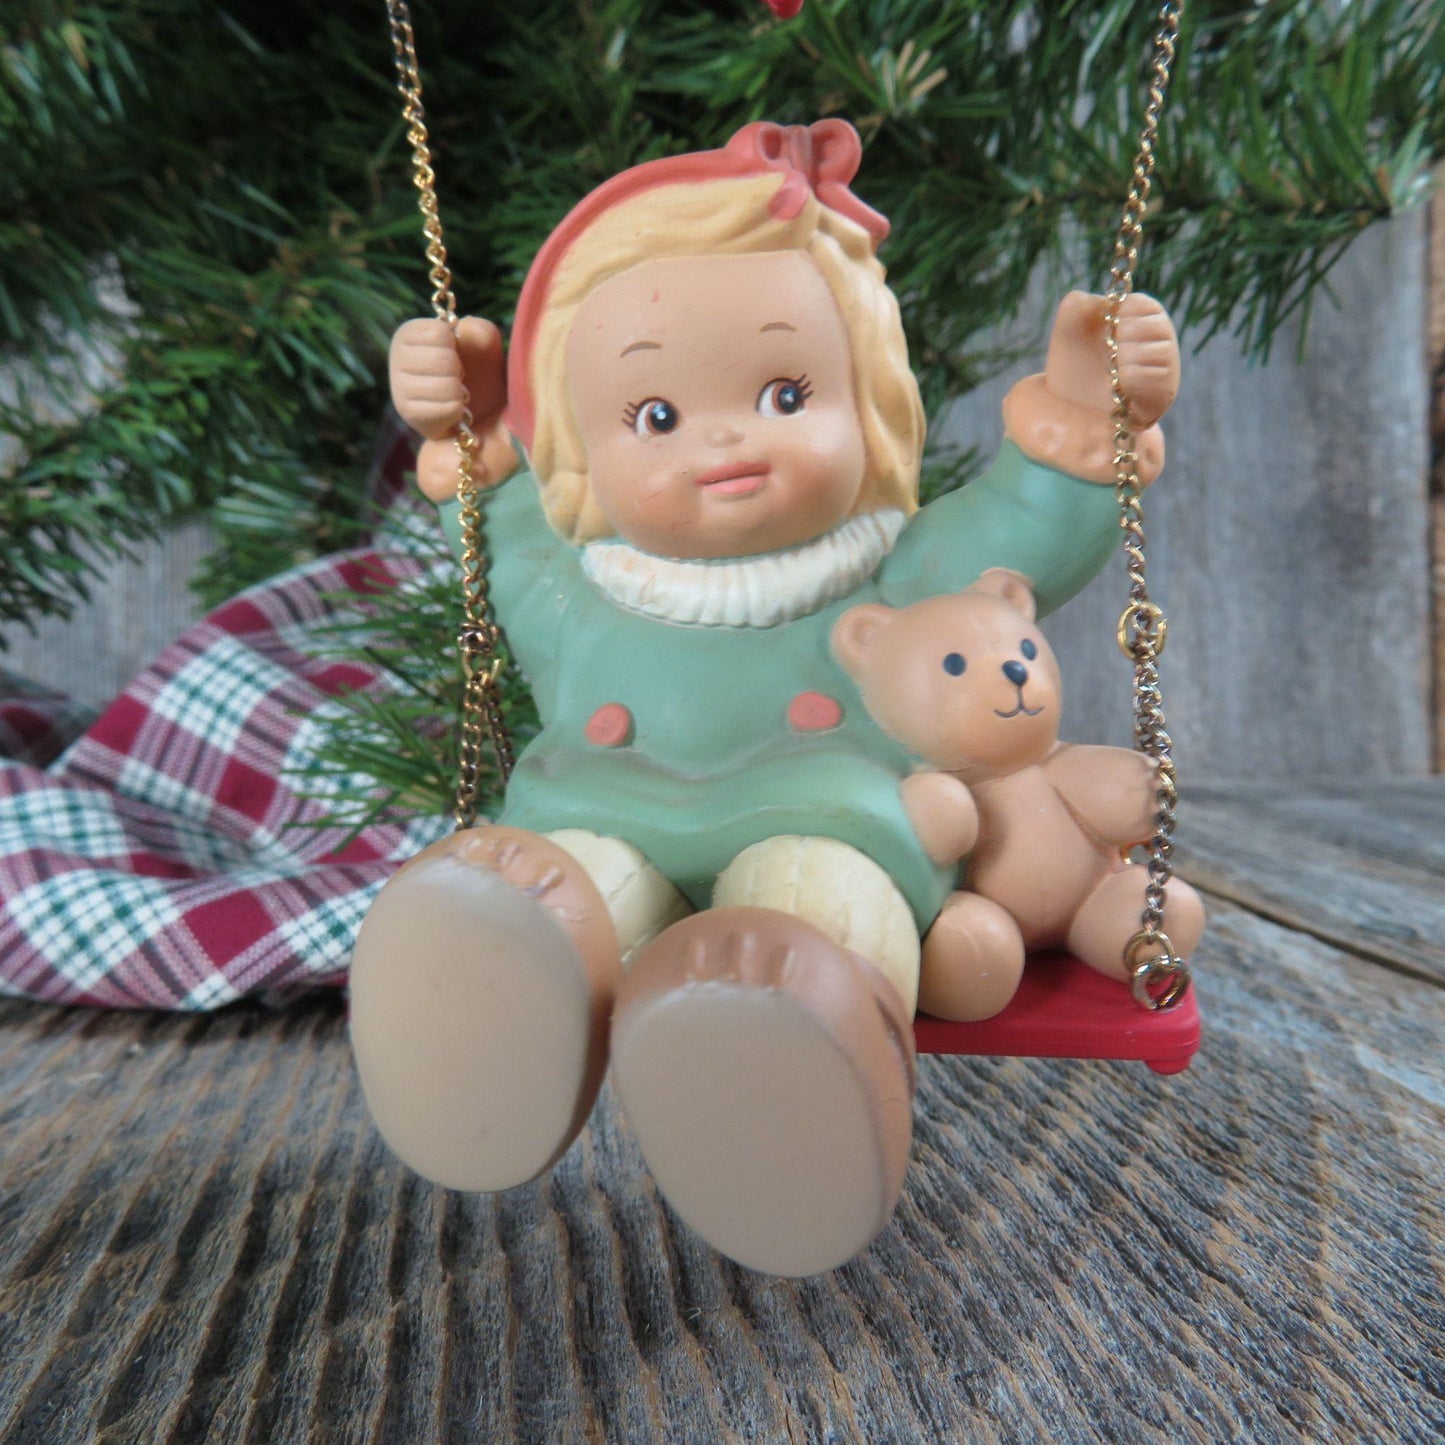 Vintage Girl Swinging with Teddy Bear Ornament Swing With Me Winter Memories of Yesterday by Enesco 1991